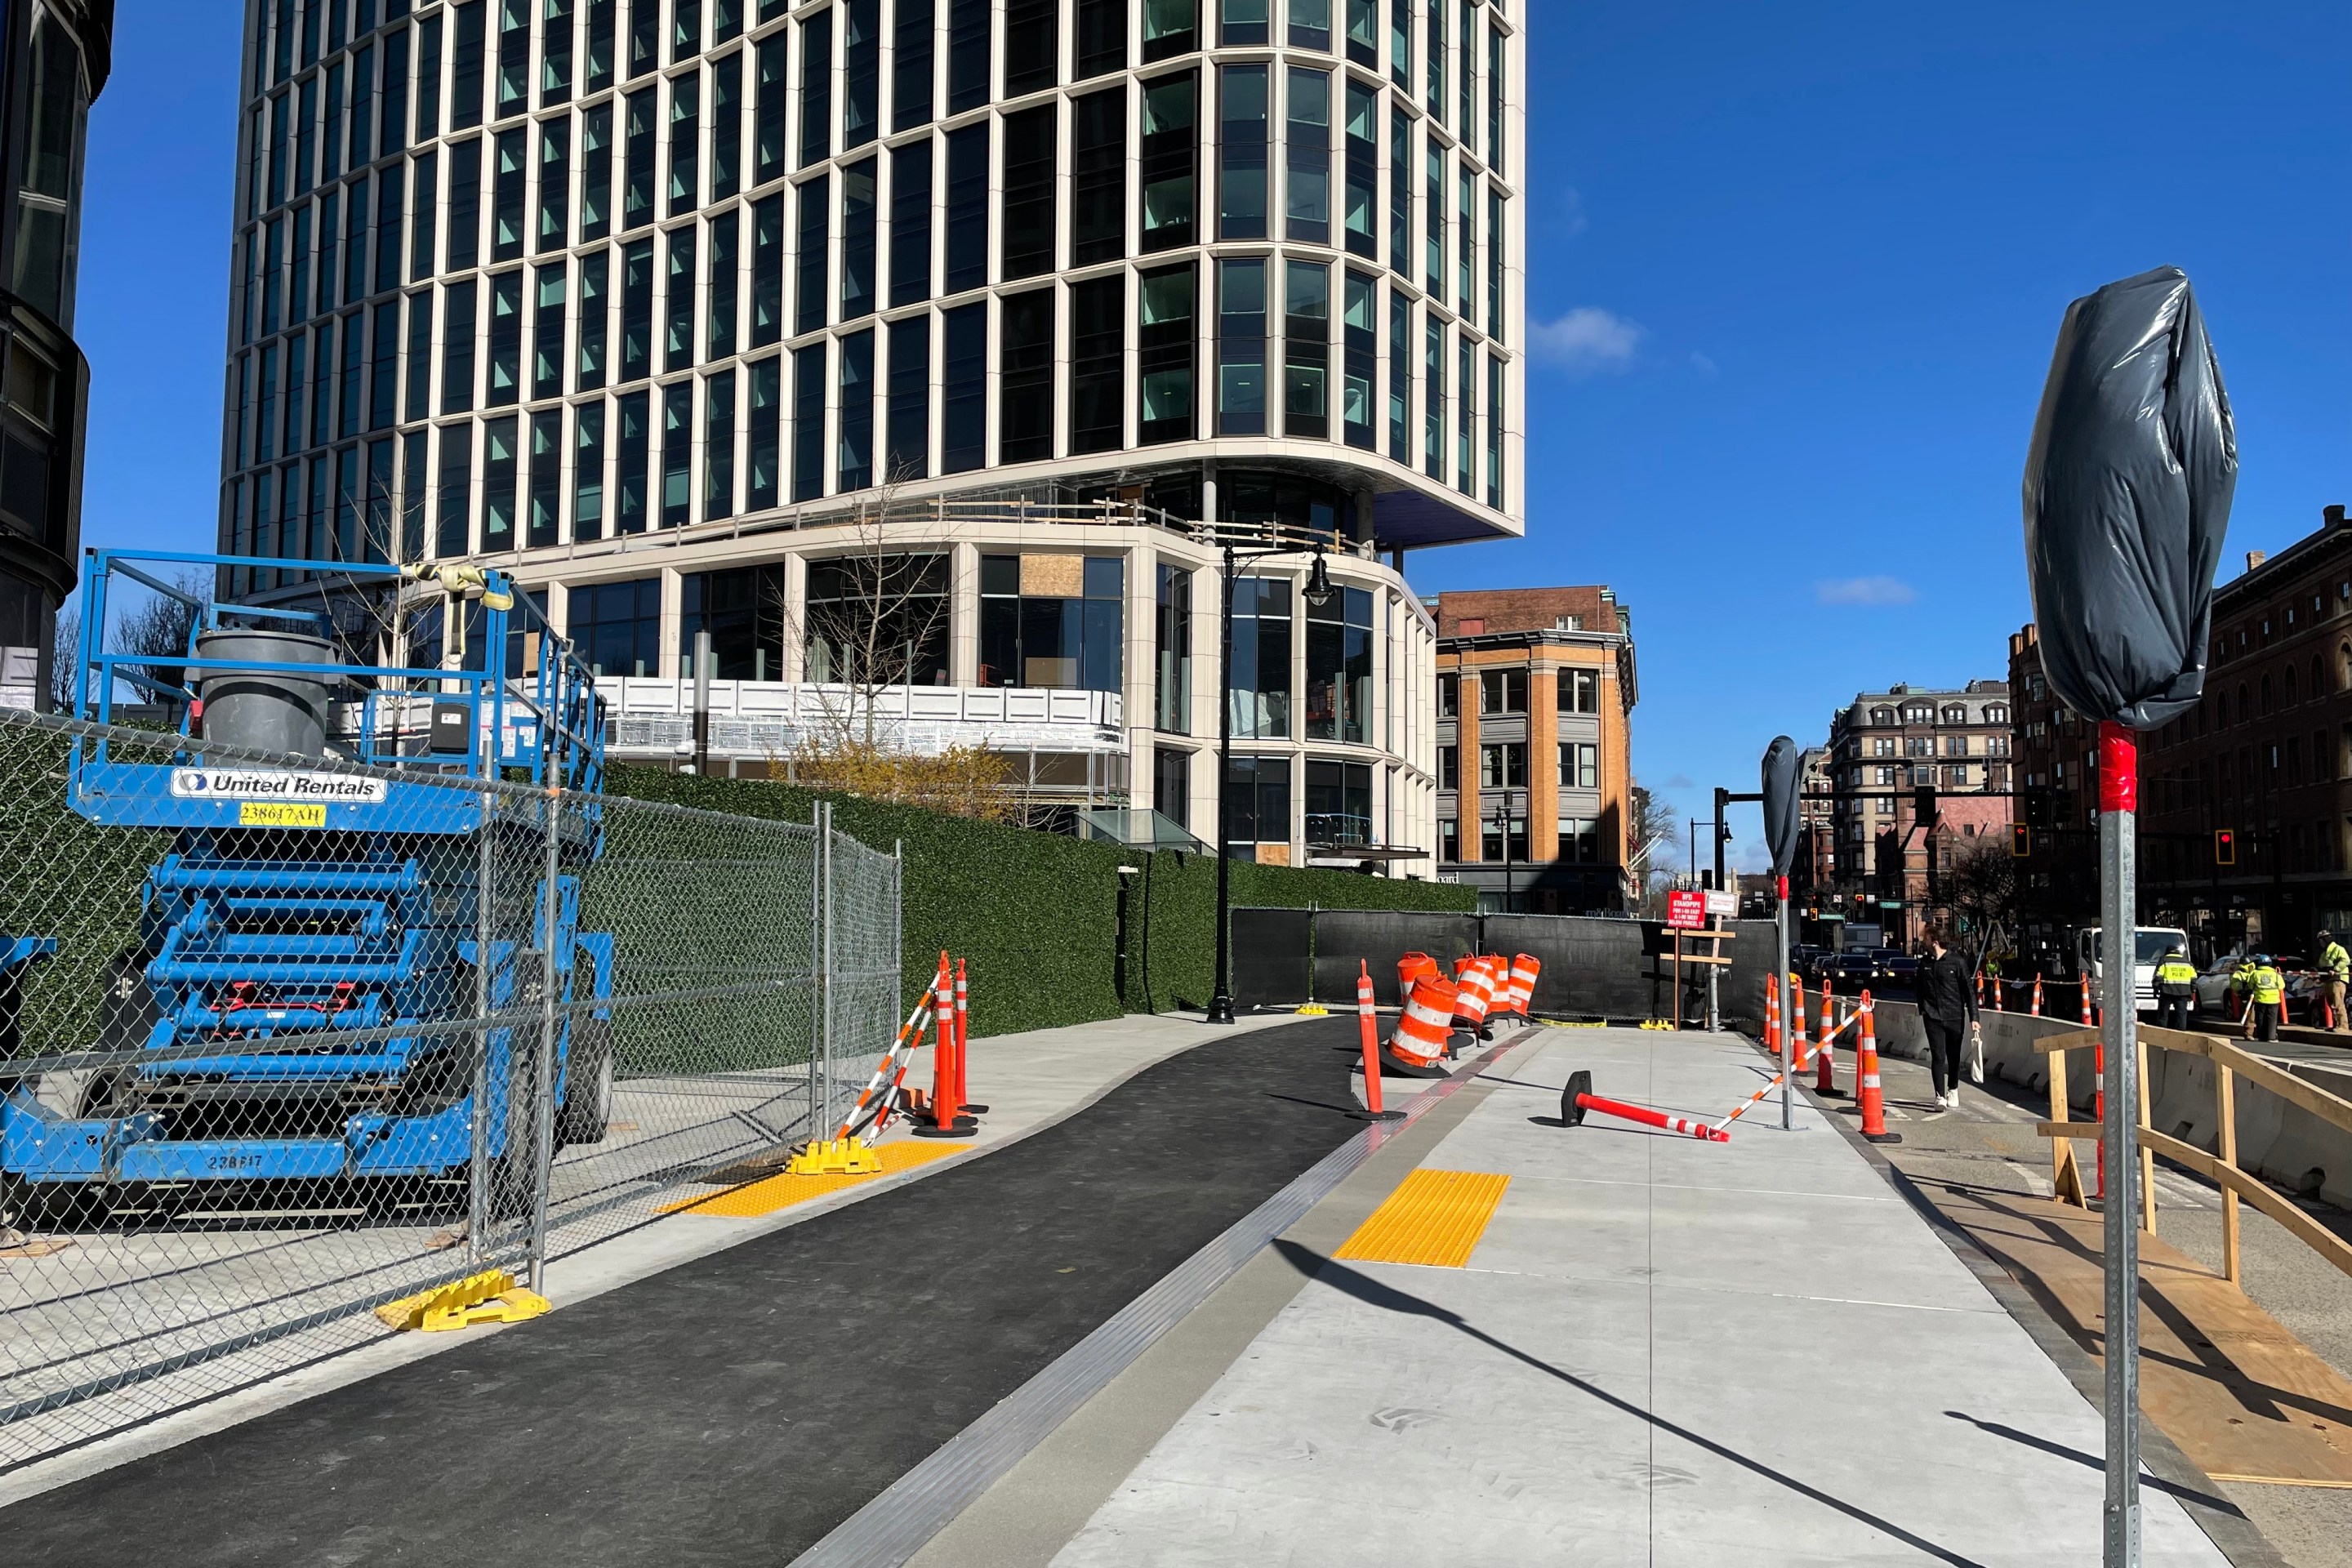 A sidewalk under construction with as asphalt bike path running down the middle. In the distance a new high-rise building rises behind a construction fence.